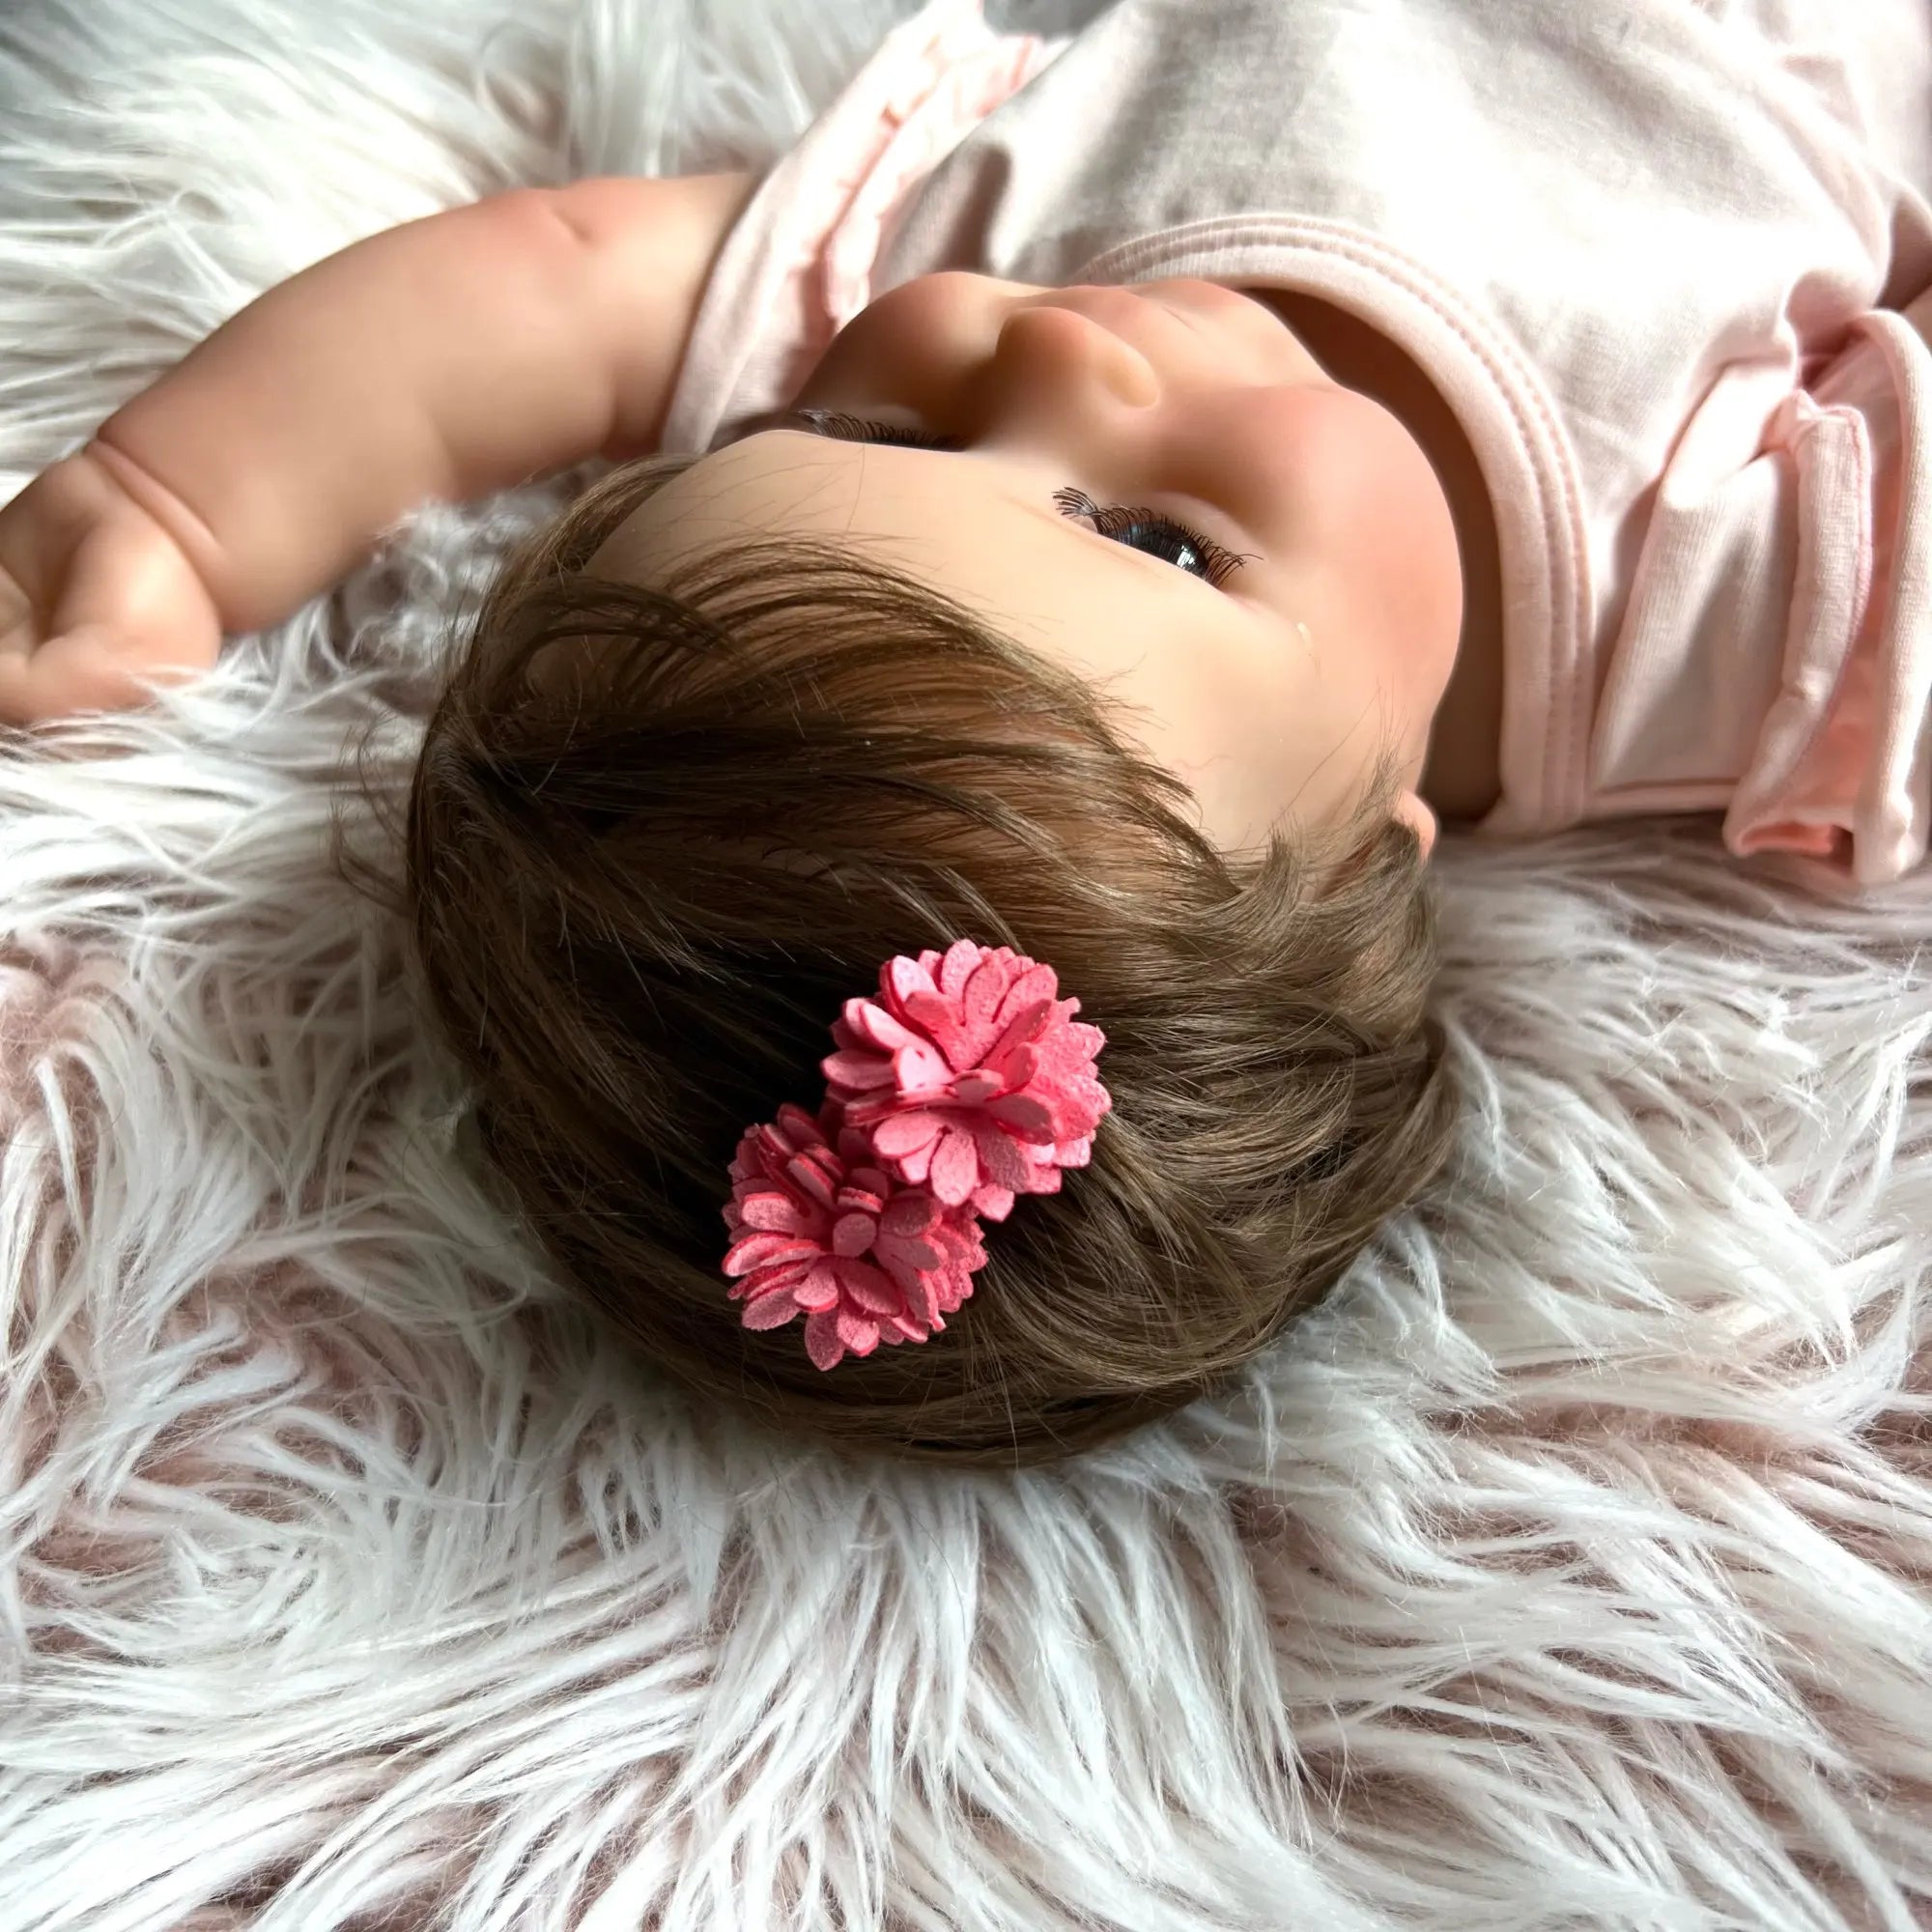 silicone baby girl doll toy view from above